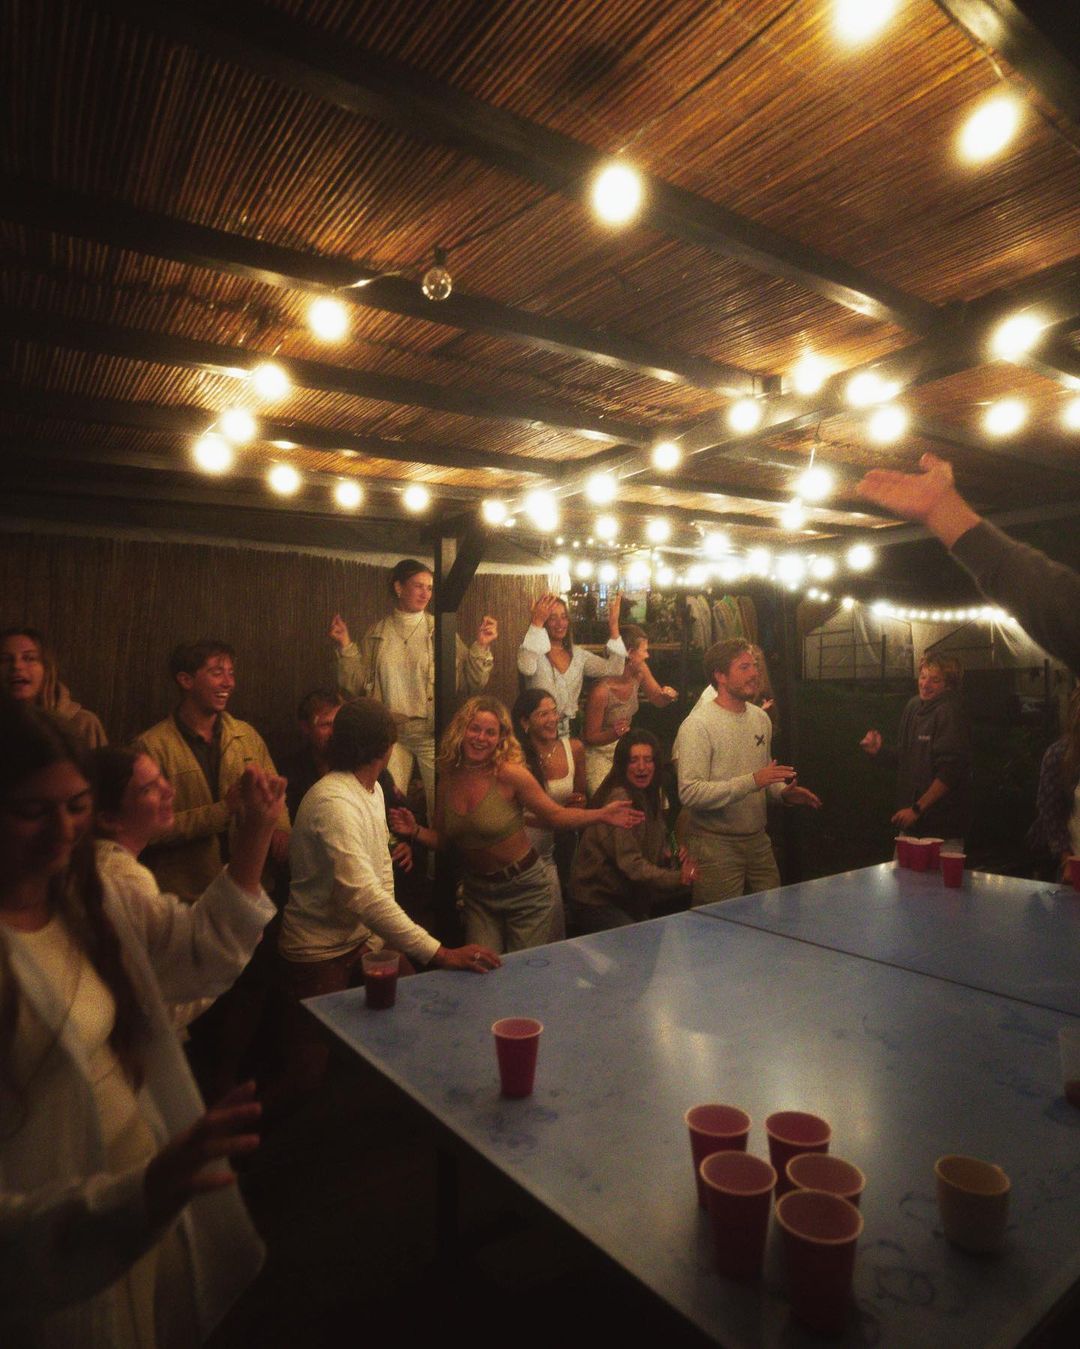 New friends partying and playing beer pong during their small group trip in Cantabria.